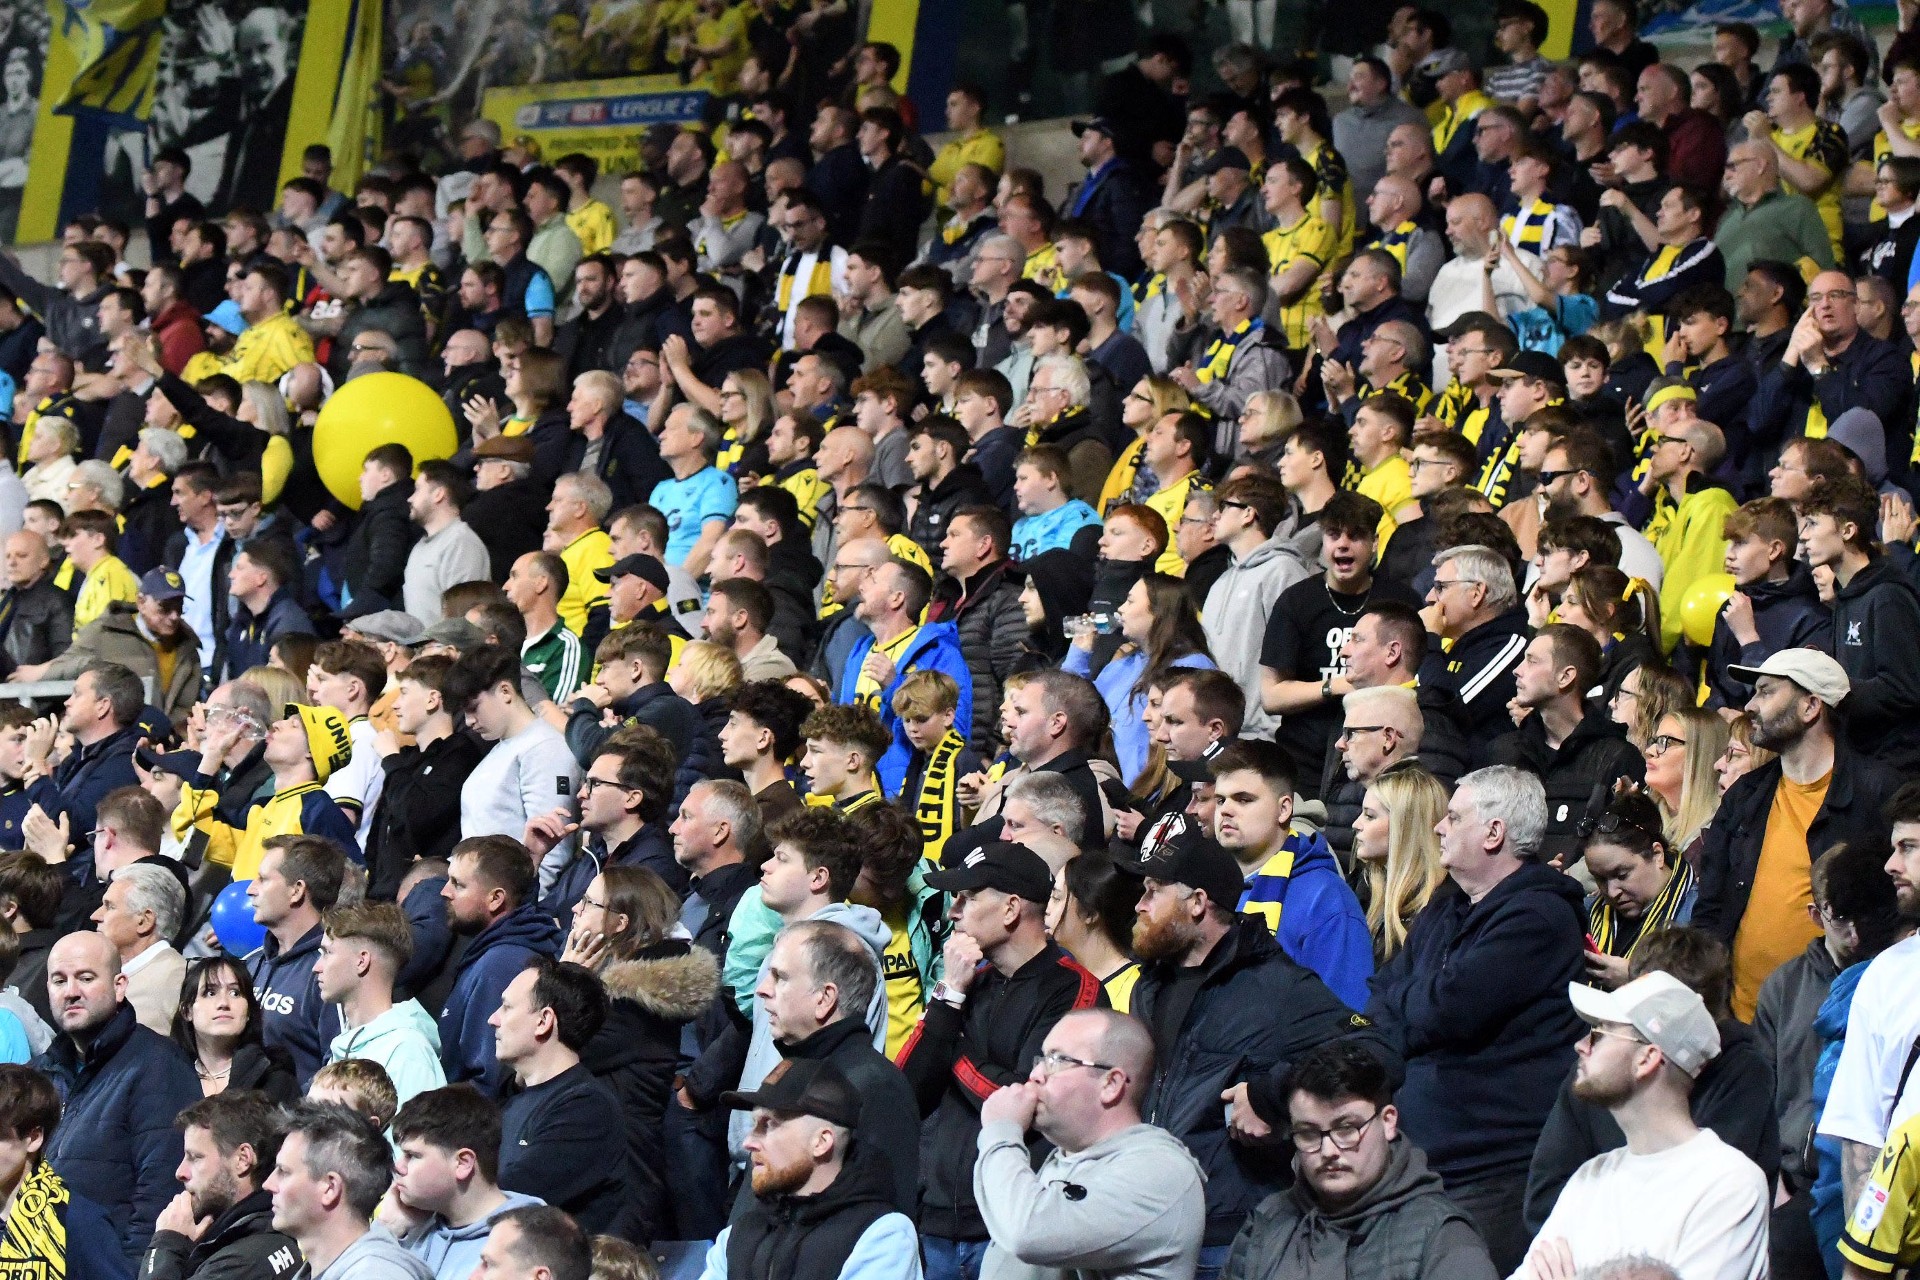 Oxford United announce season ticket prices and information